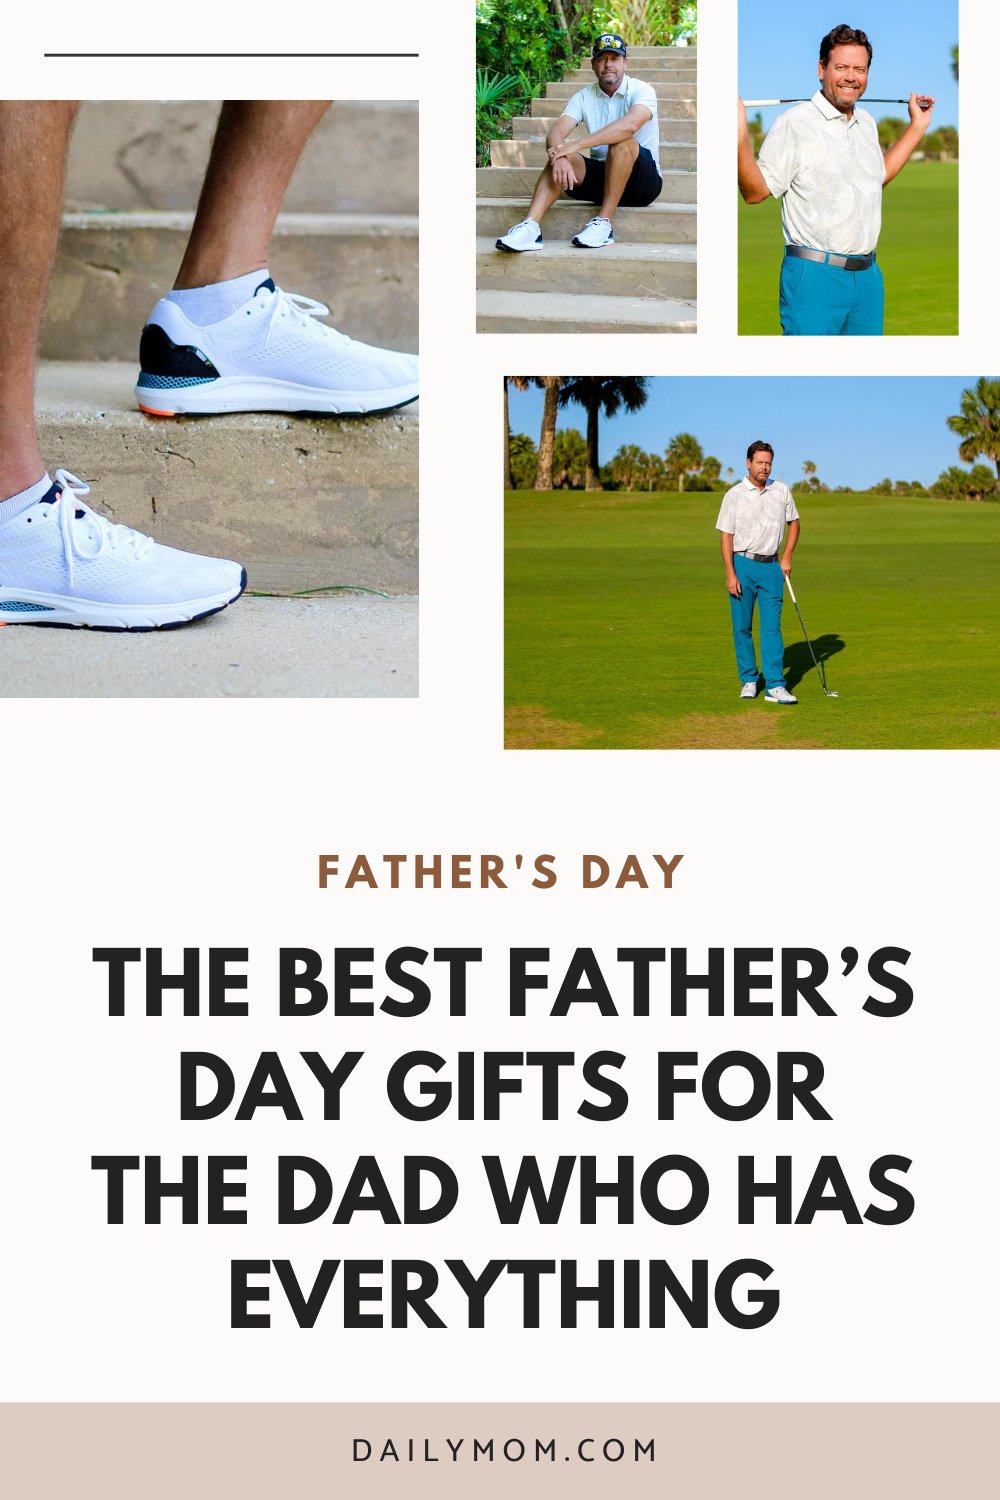 19 Of The Best Father's Day Gifts For The Dad Who Has Everything